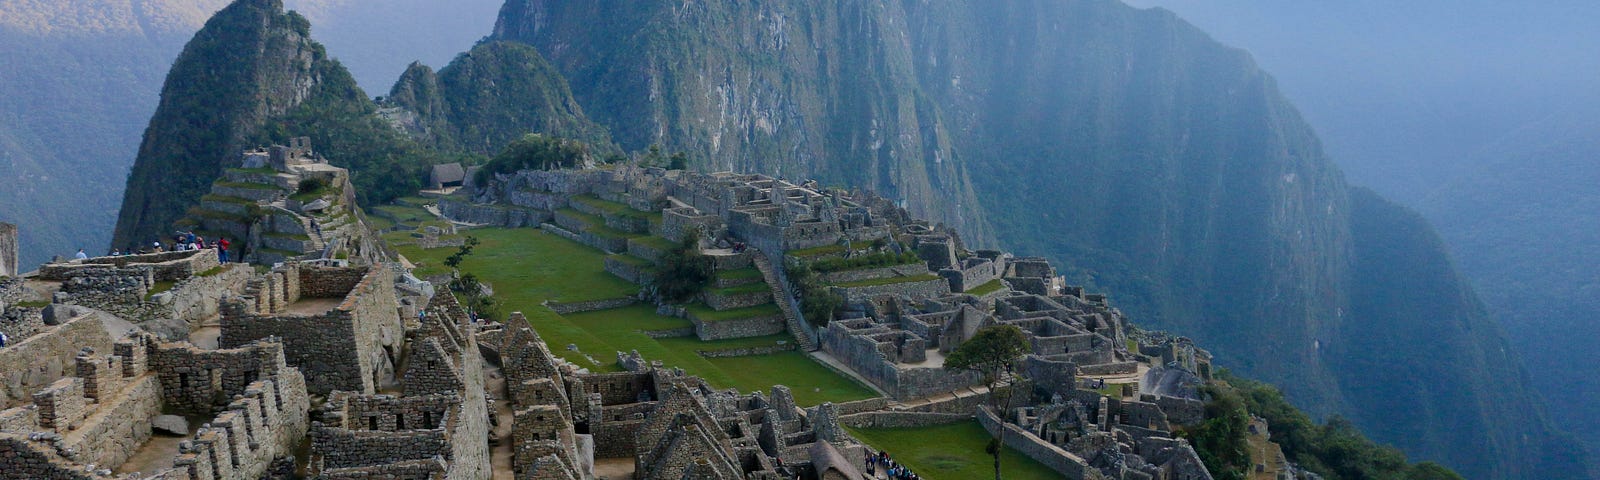 After being invited on a trip to Machu Picchu I had second thoughts as I started thinking I may die there.